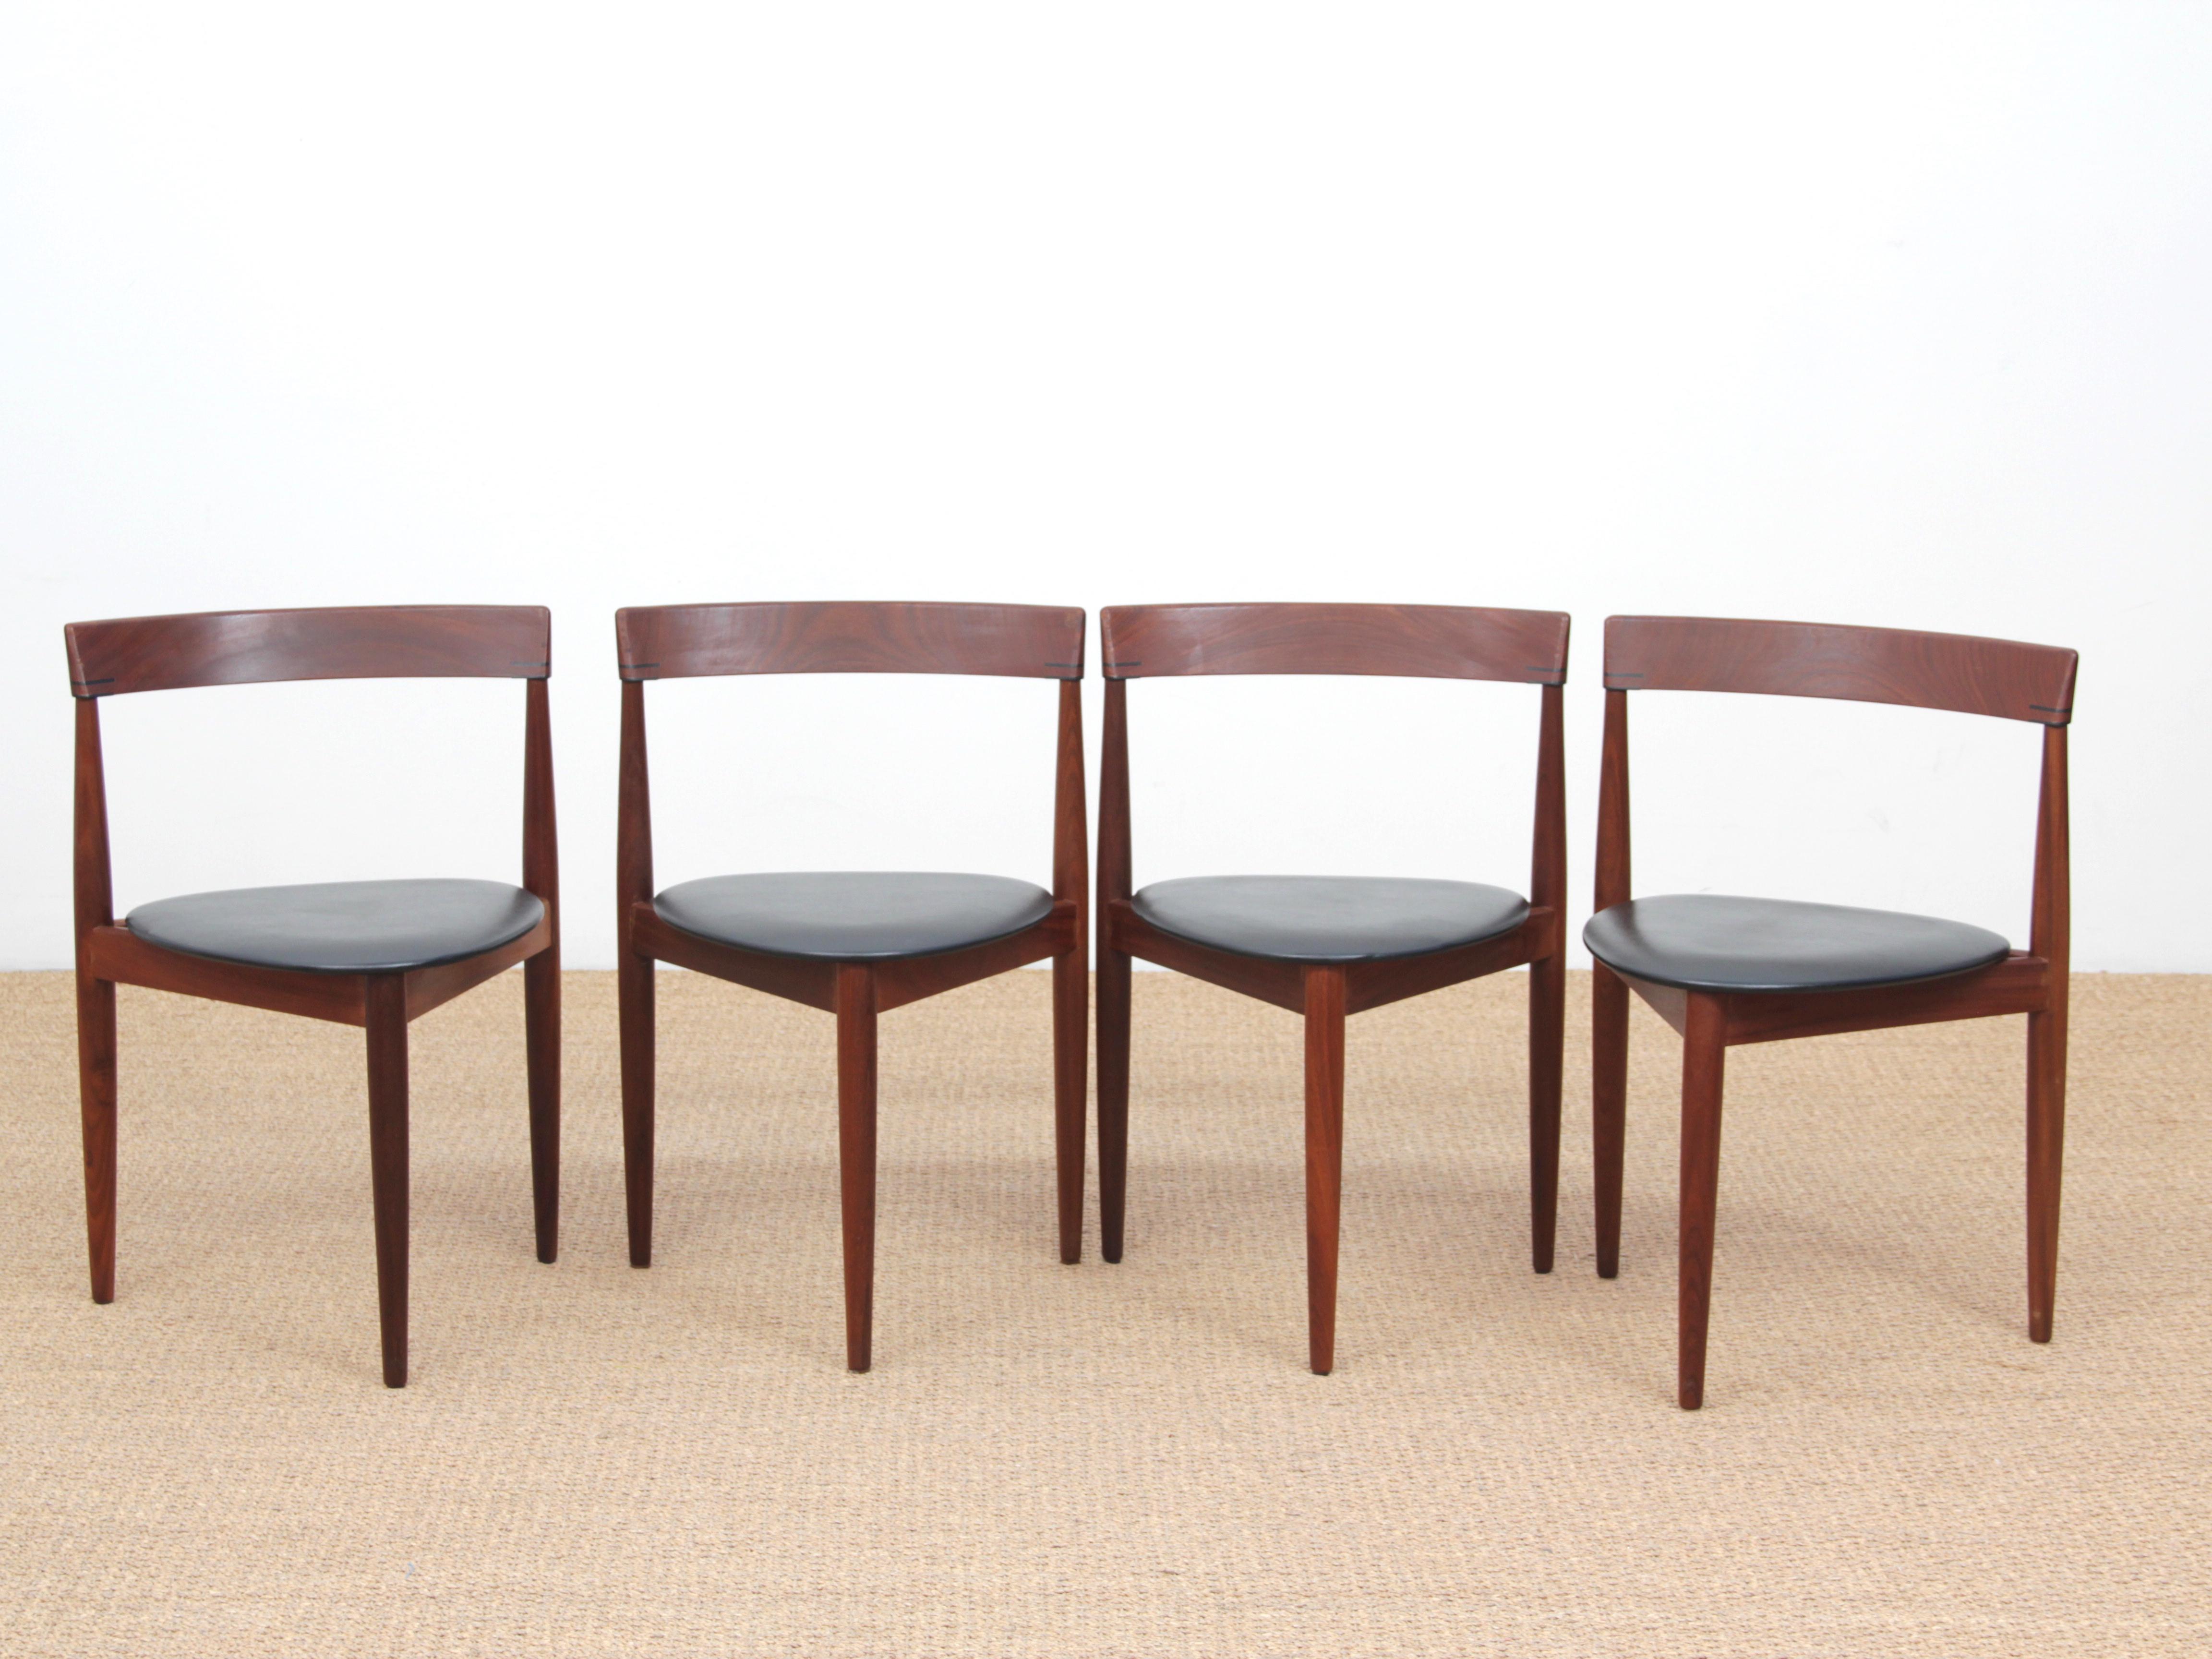 Mid-Century Modern dining set by Hans Olsen for Frem Rojle. Table with extending leave. 4 chairs with 3 legs. New upholstery in leather.